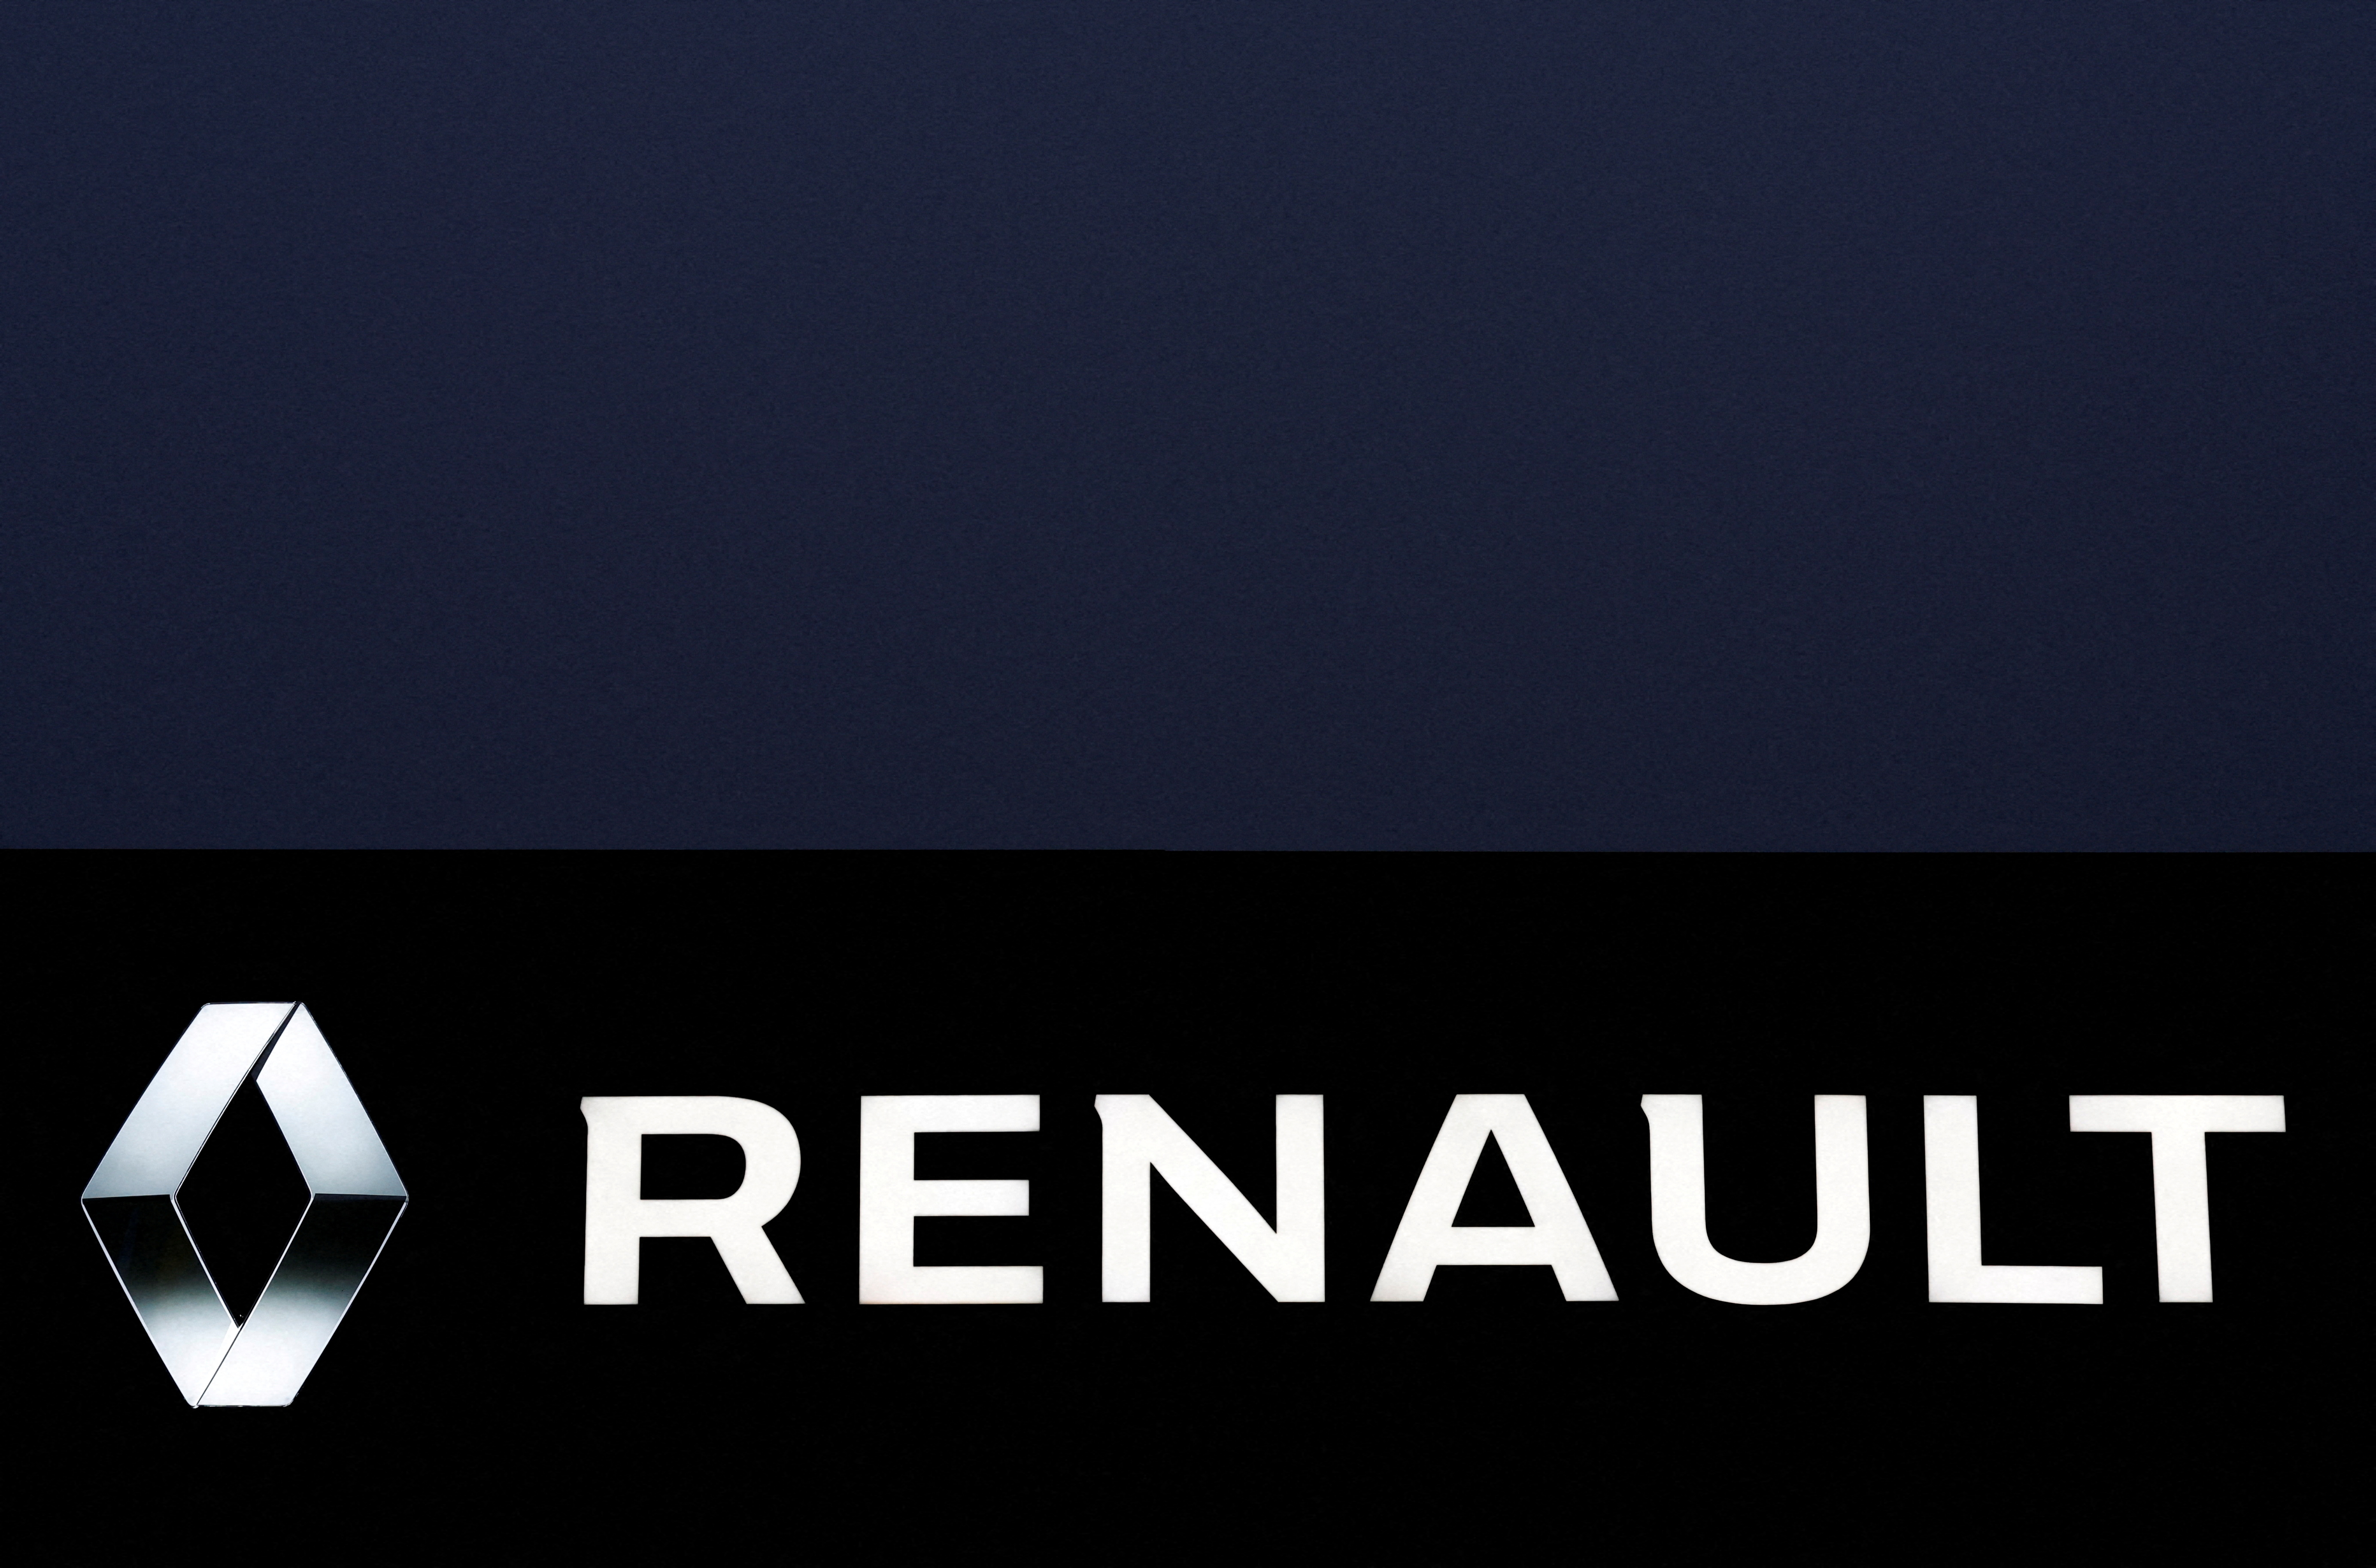 The logo of Renault carmaker is pictured at a dealership in Vertou